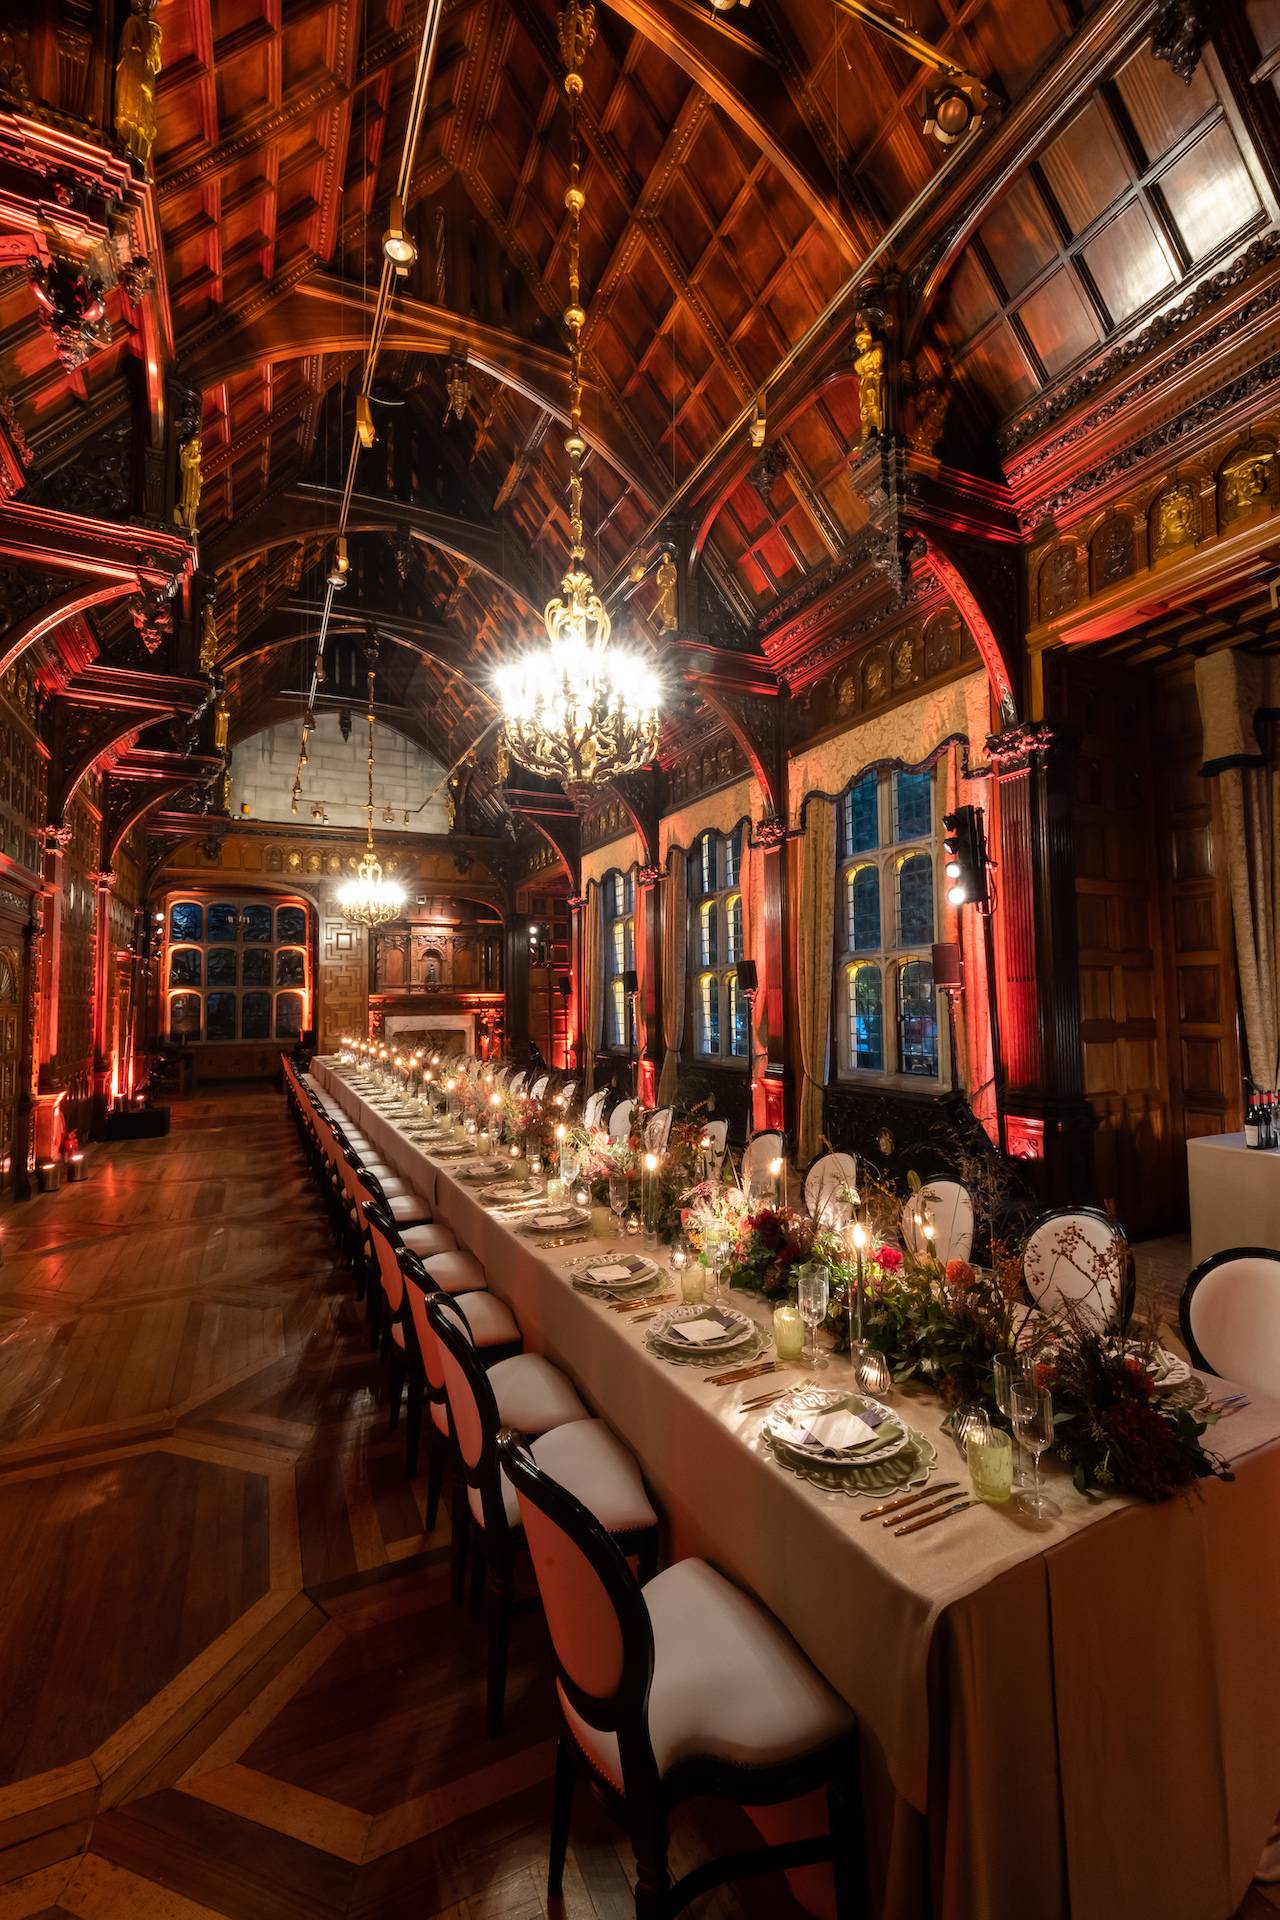 Private parties at Two temple place